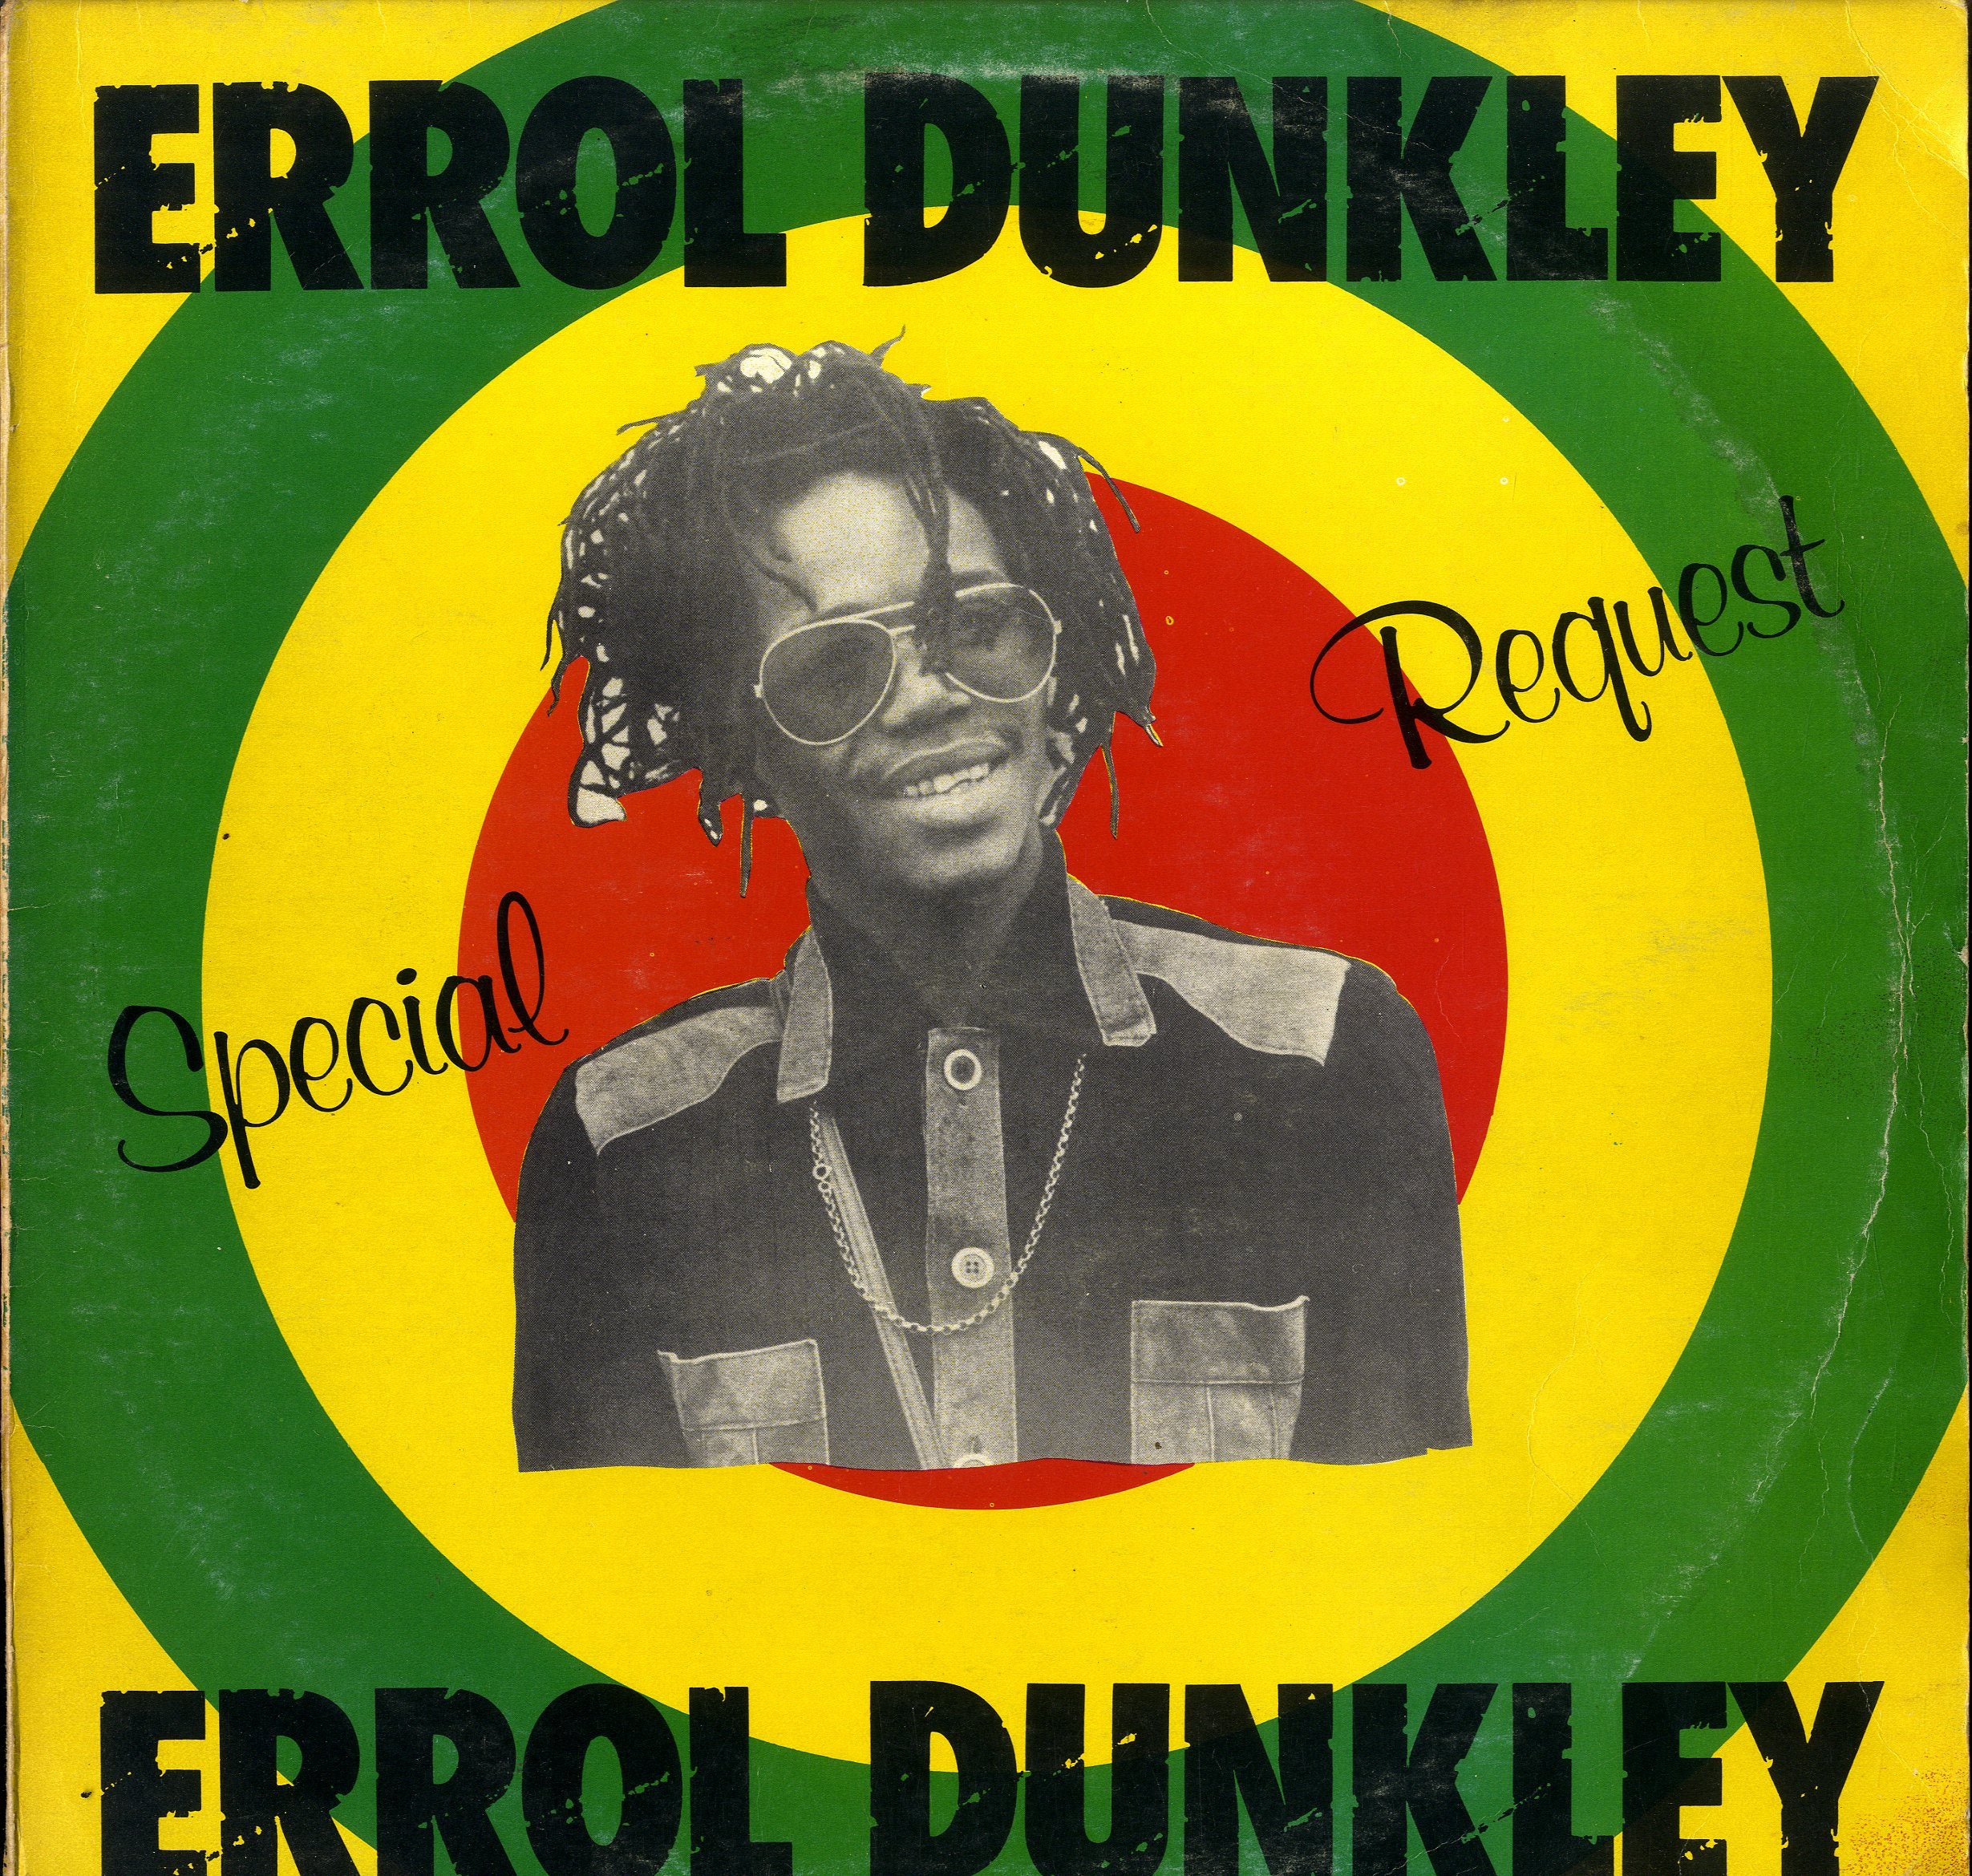 ERROL DUNKLEY [Special Request]